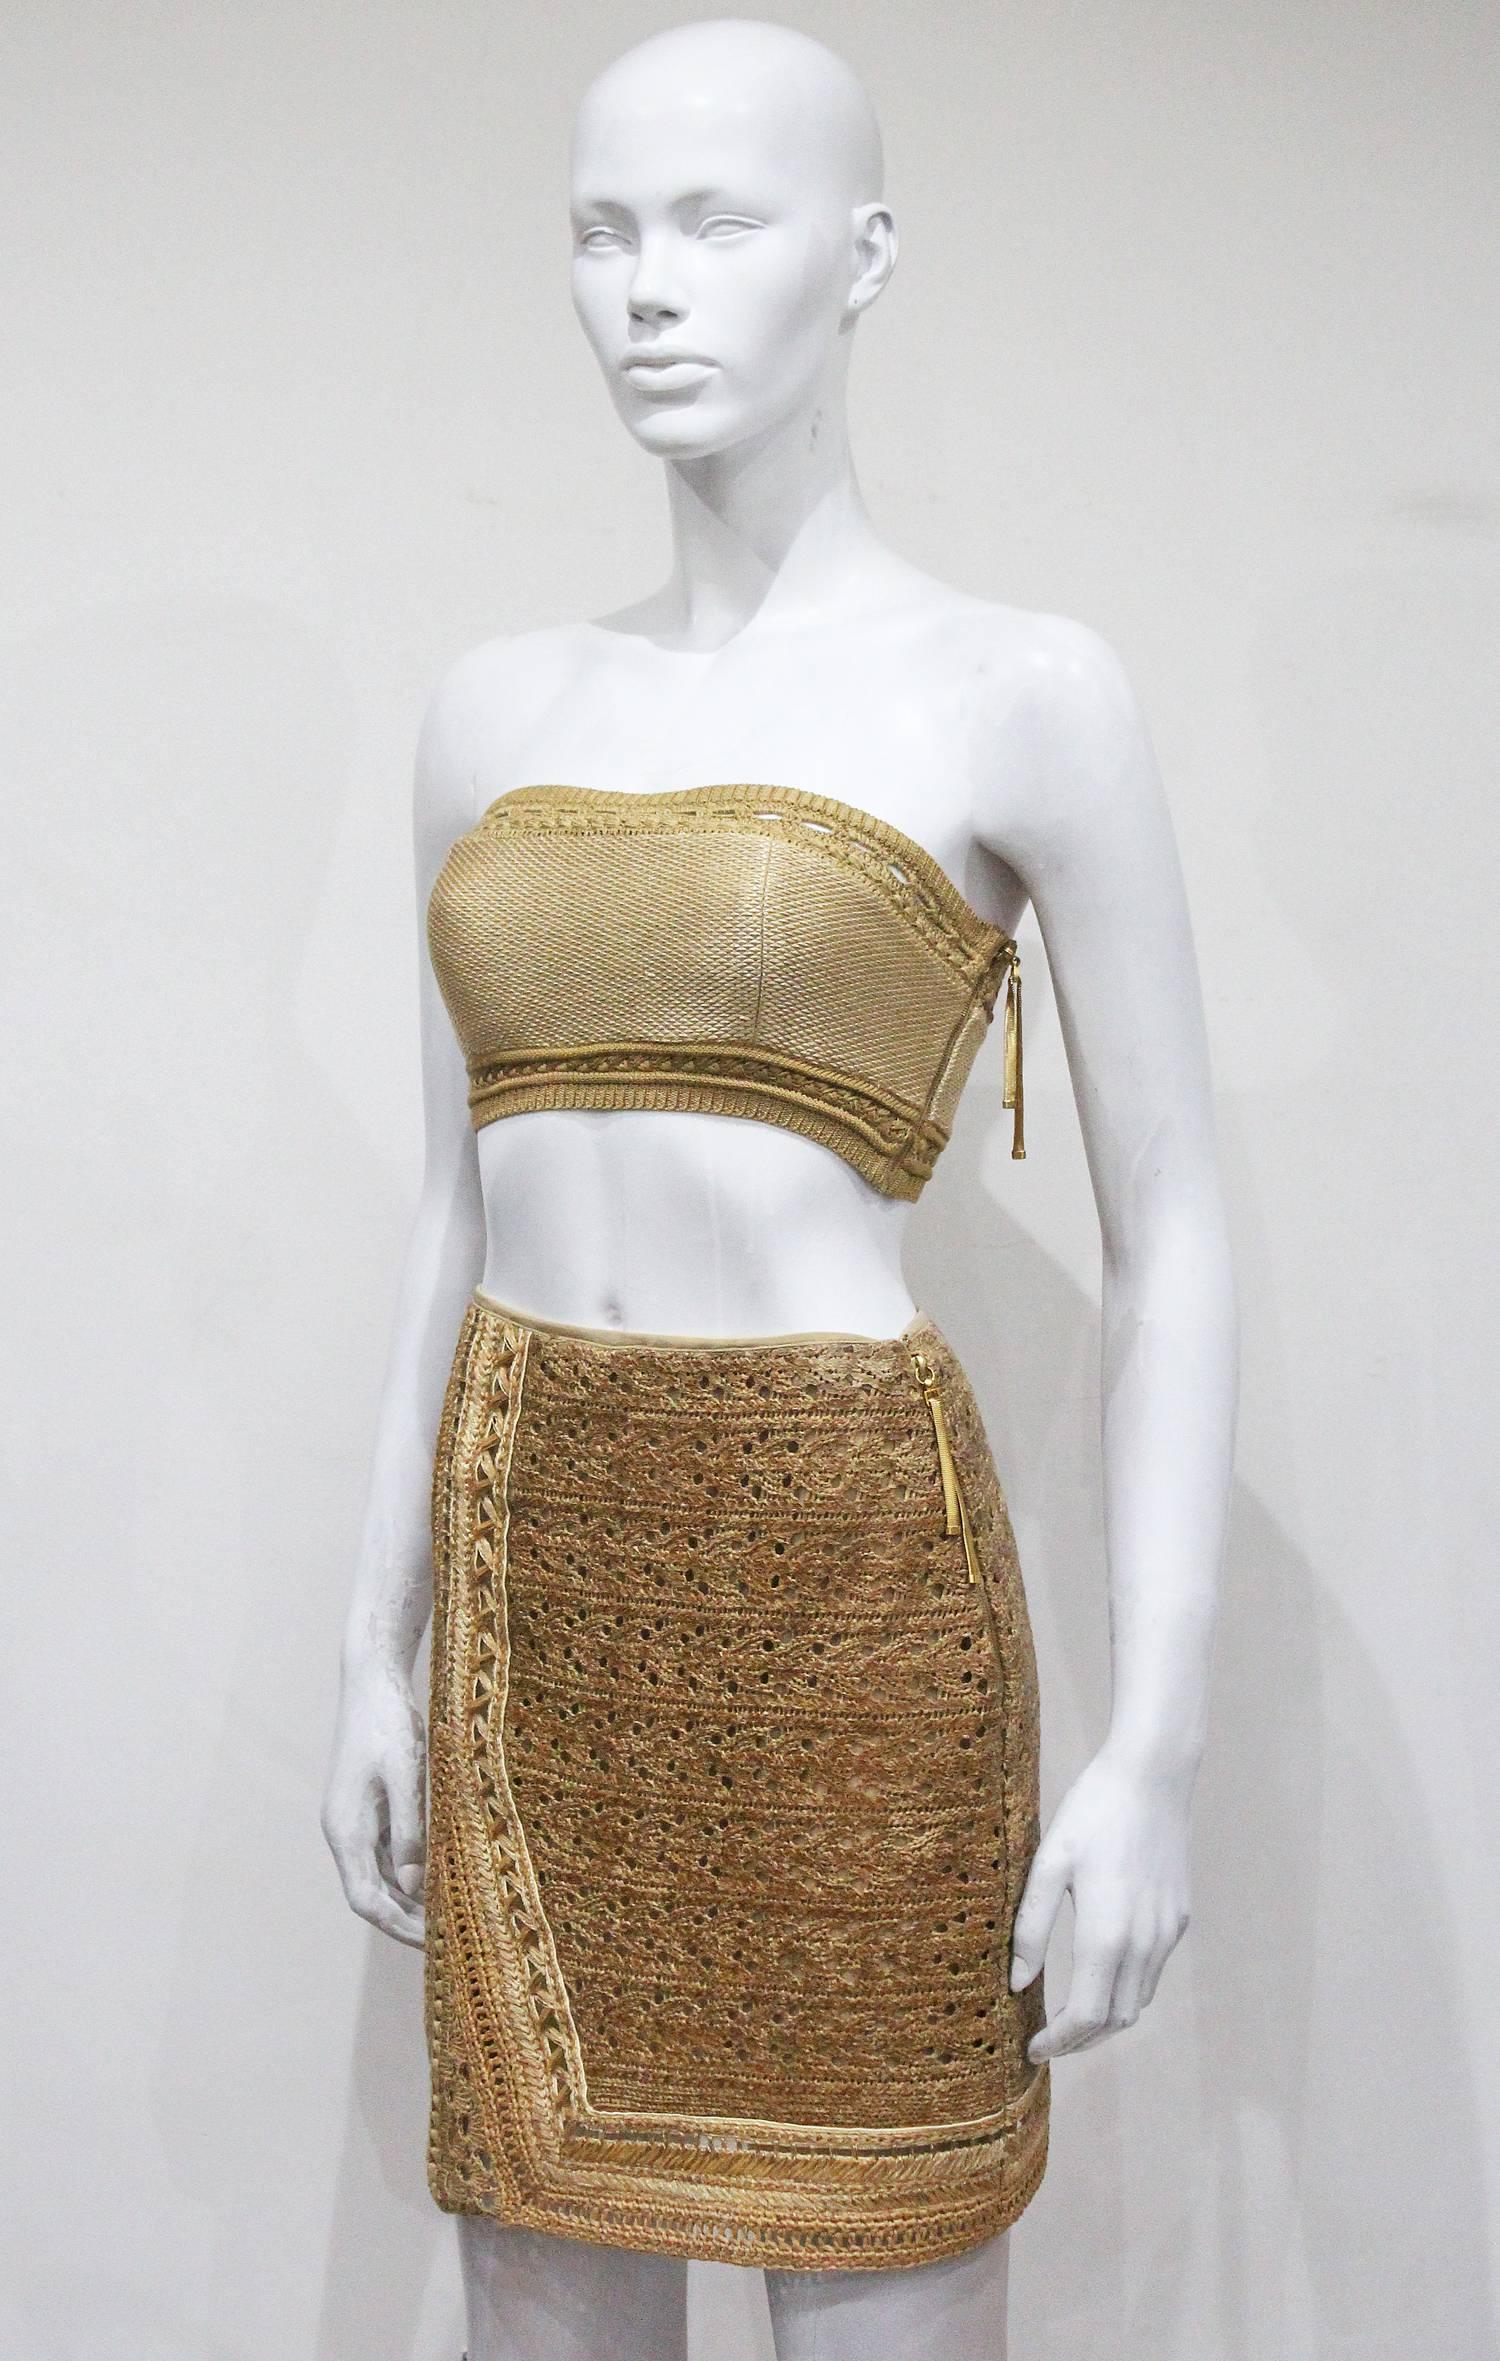 A Gianfranco Ferre skirt and bustier ensemble from the Spring/Summer 2001 season. The ensemble is in a woven raffia with assets of knitted crochet. The bustier has a built in bra and gold metal tassel zipper on one side. The skirt is in the fitted